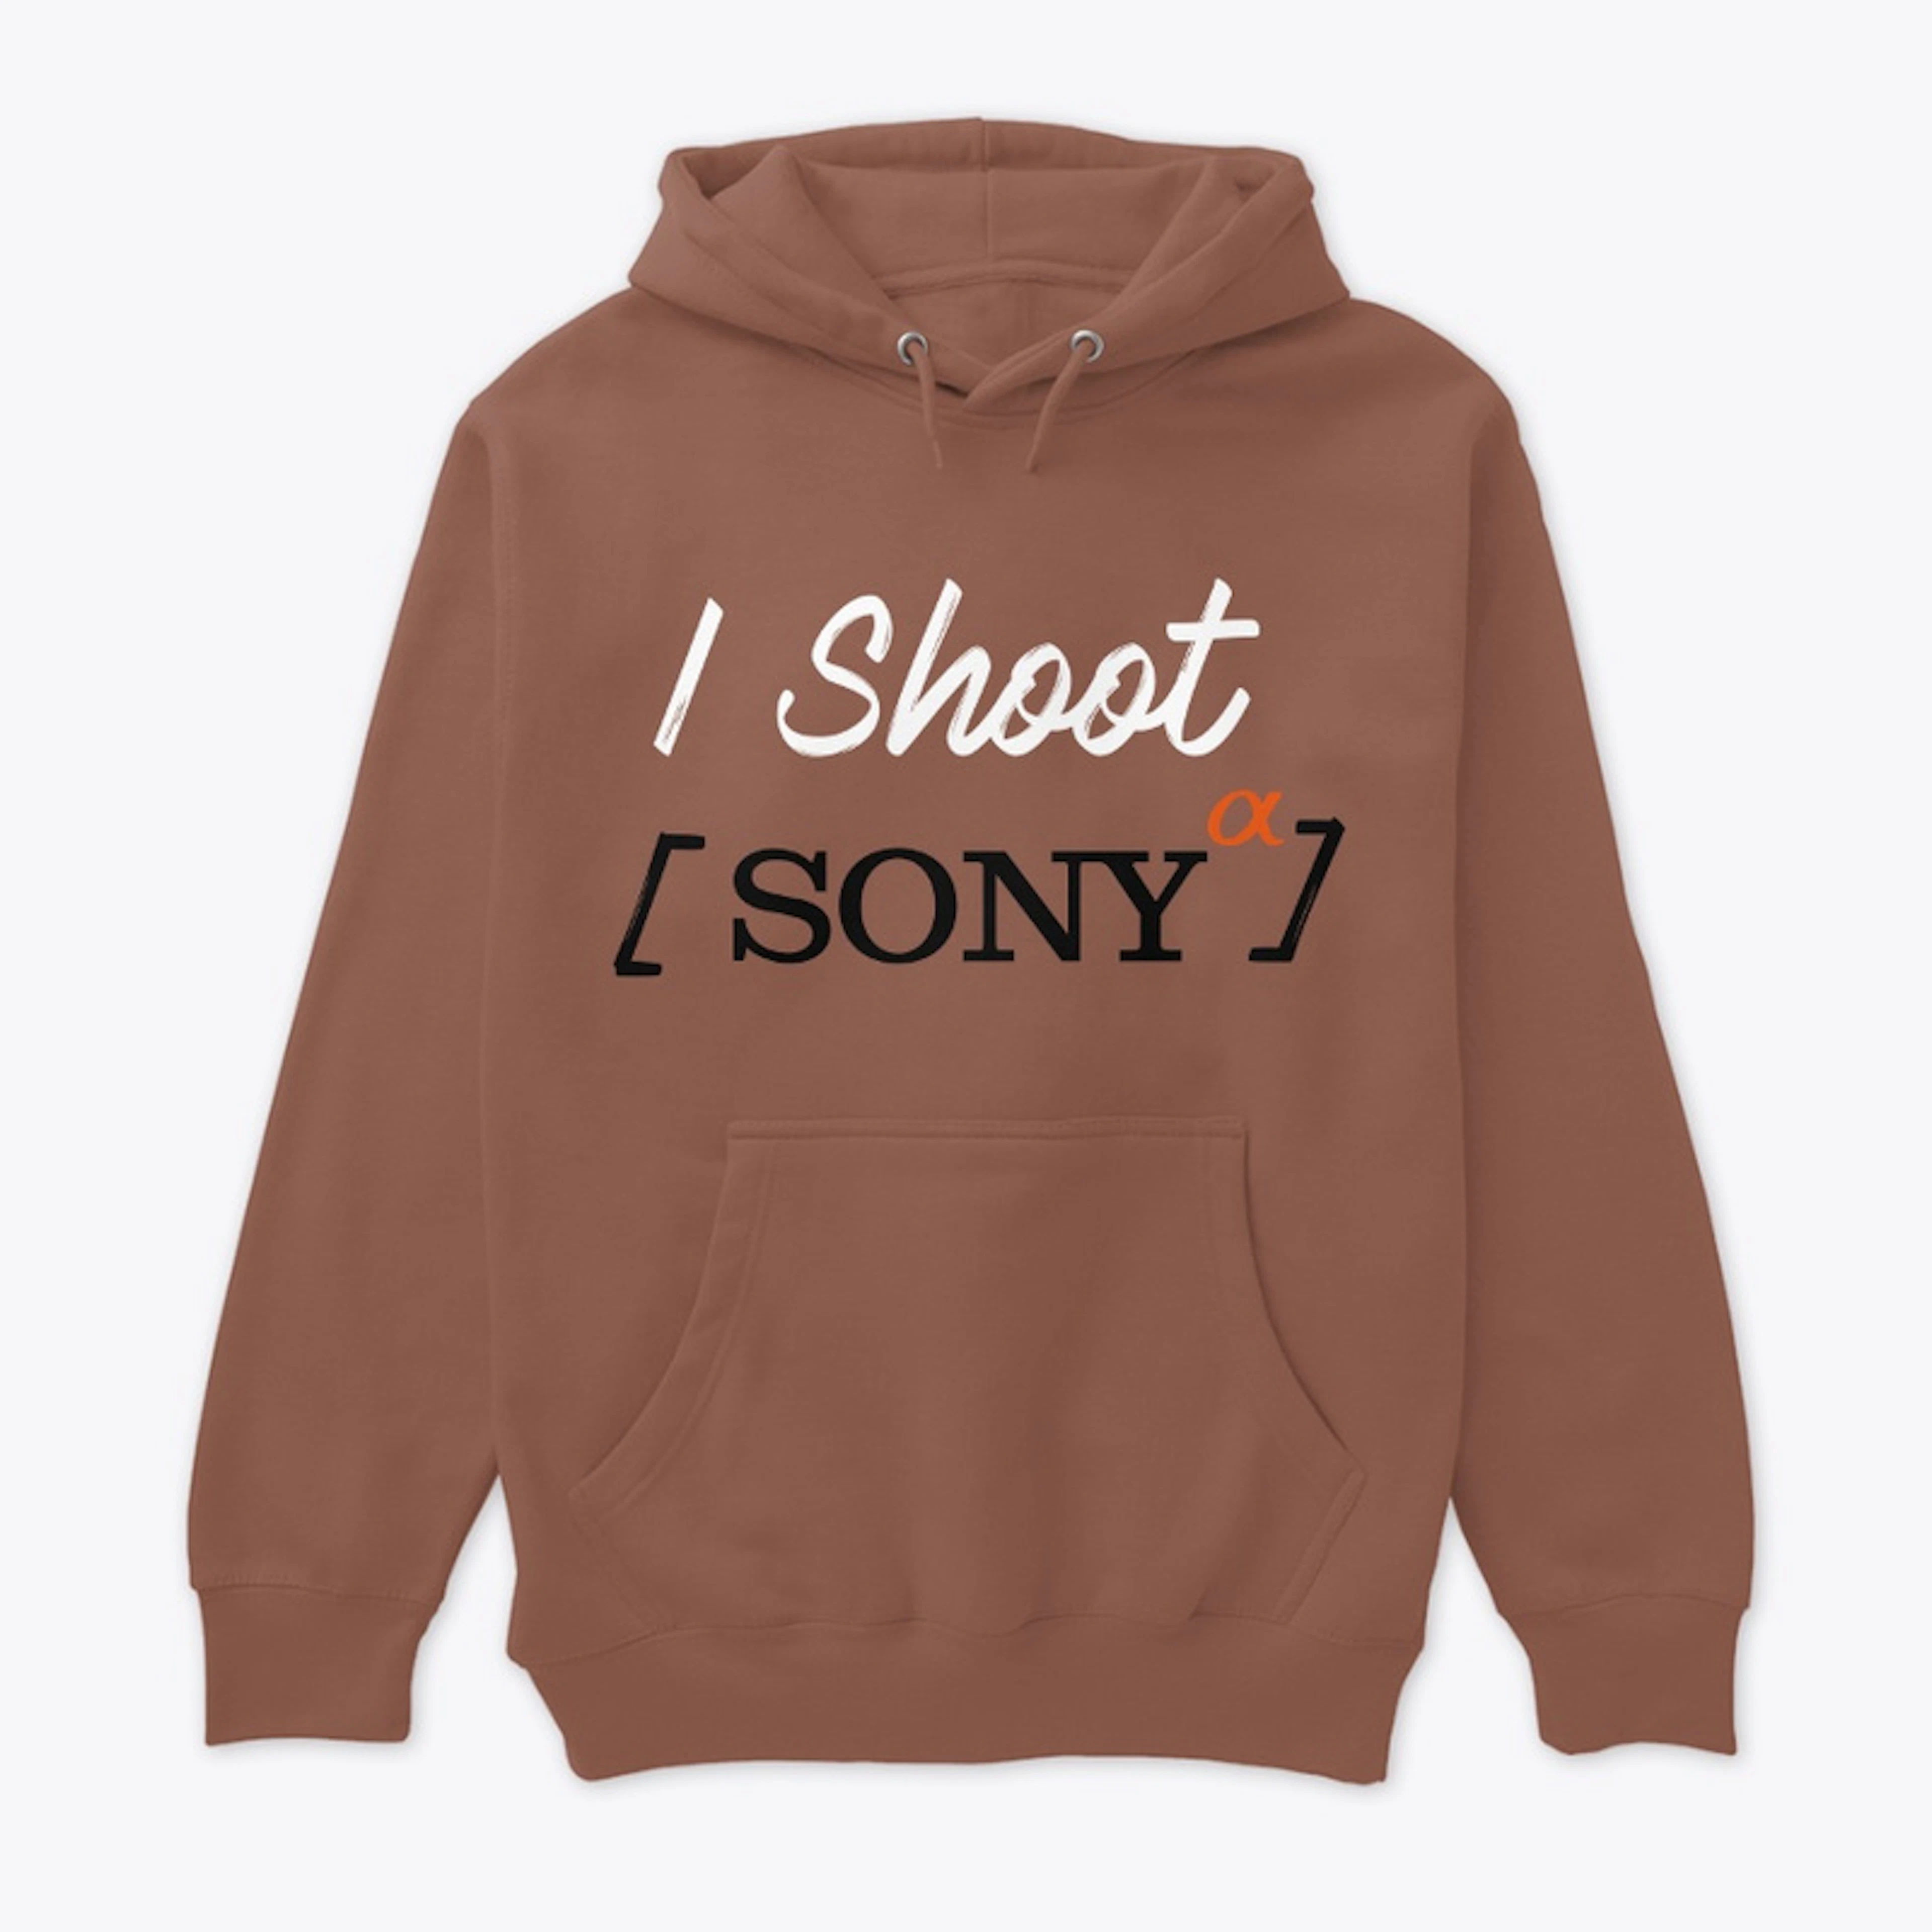 "I Shoot Sony" Pull-Over Hoodie